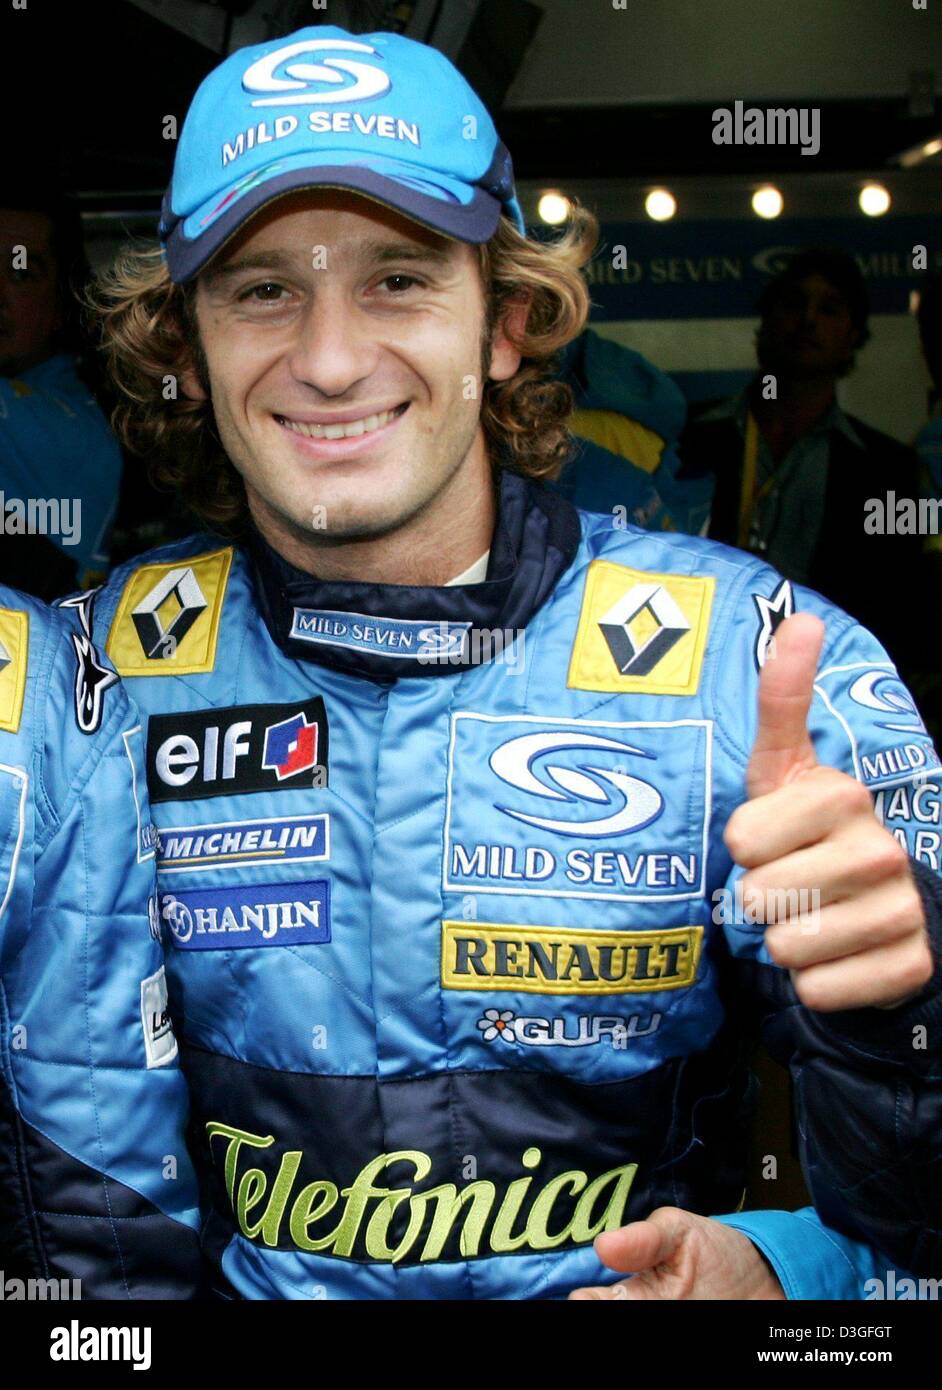 dpa files) - Italian Formula 1 driver Jarno Trulli gives a thumbs up after  a successful qualifying round for the Belgian Grand Prix in Spa, Belgium,  28 August 2004. Trulli, who was